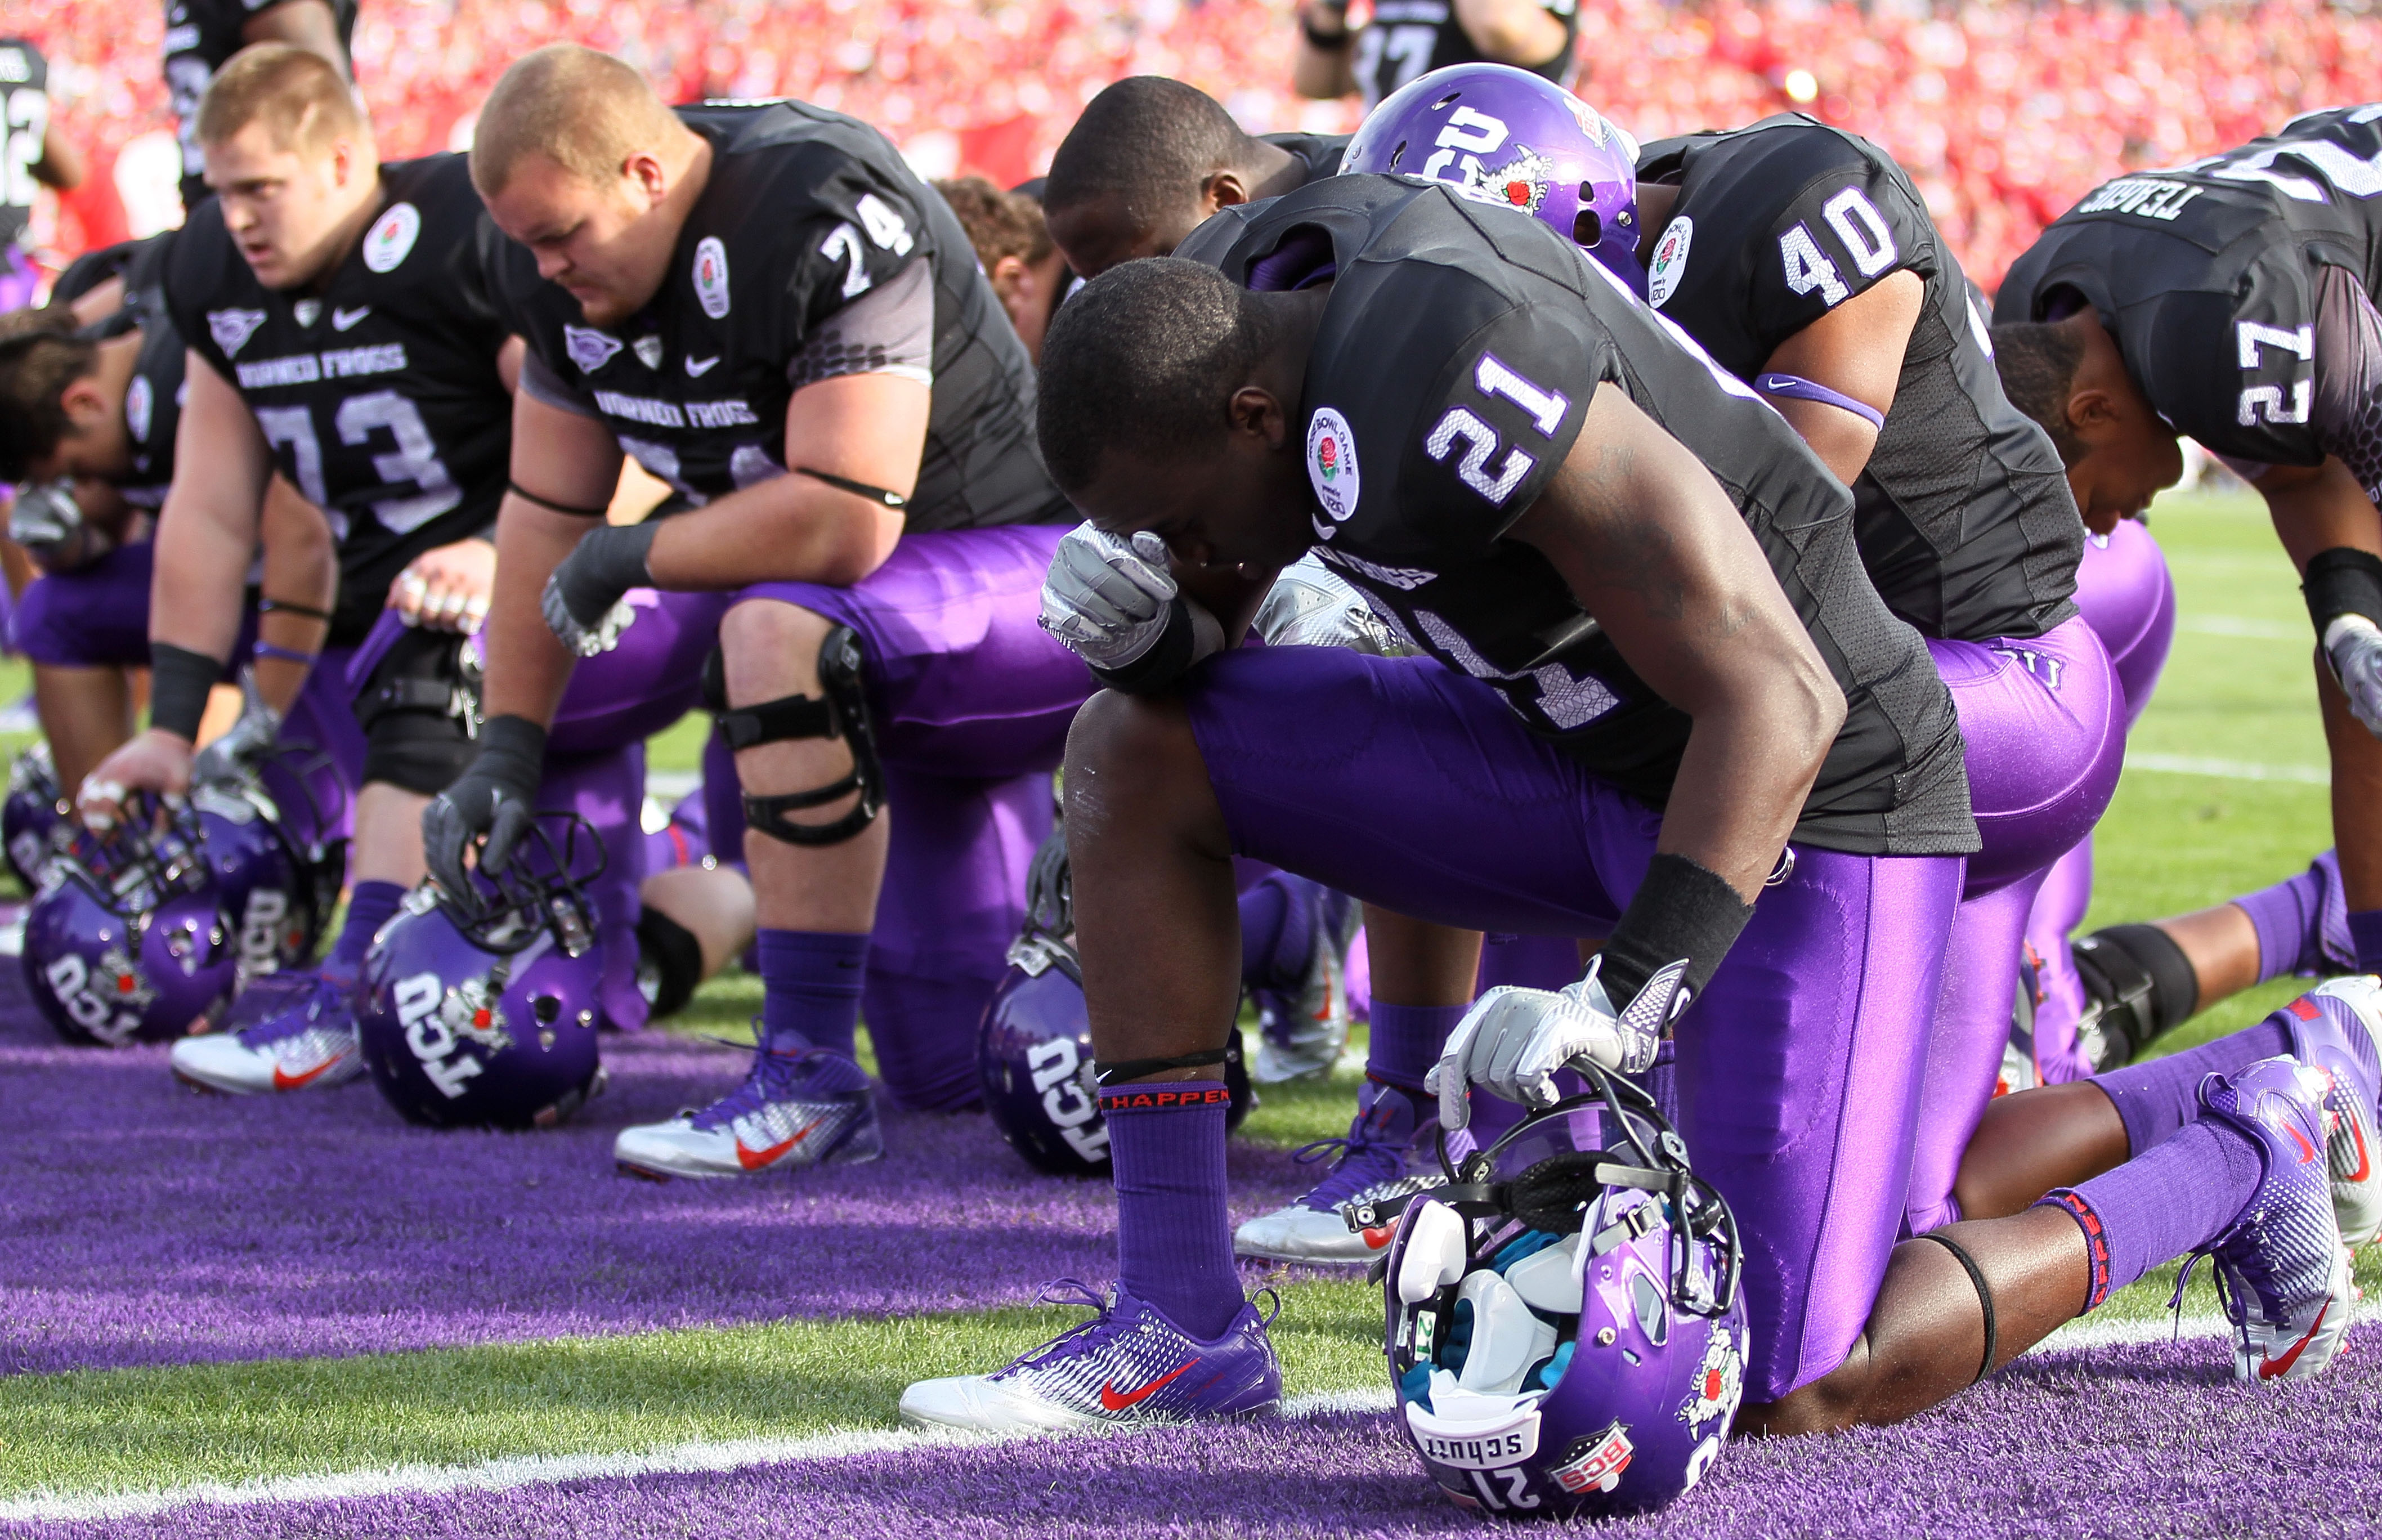 PASADENA, CA - JANUARY 01:  The TCU Horned Frogs kneel prior to playing the Wisconsin Badgers in the 97th Rose Bowl game on January 1, 2011 in Pasadena, California.  (Photo by Jeff Gross/Getty Images)